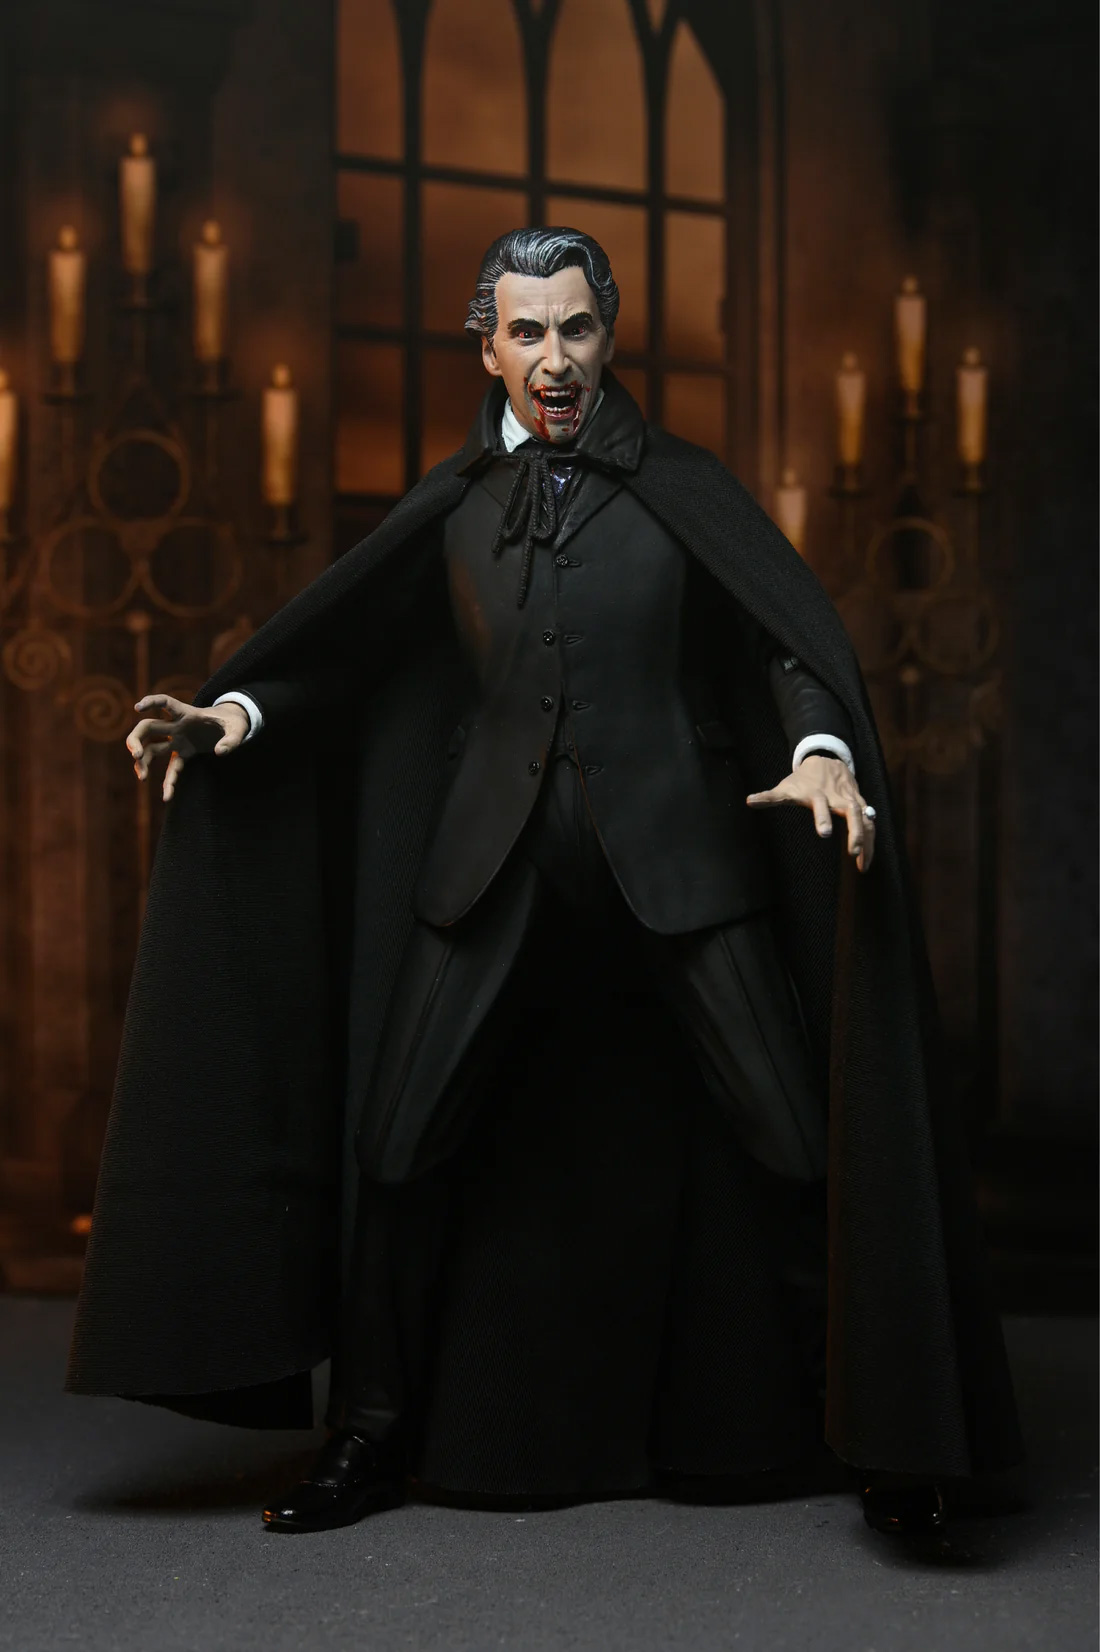 Count Dracula Ultimate Horror of Dracula (1958) 7-Inch Action Figure